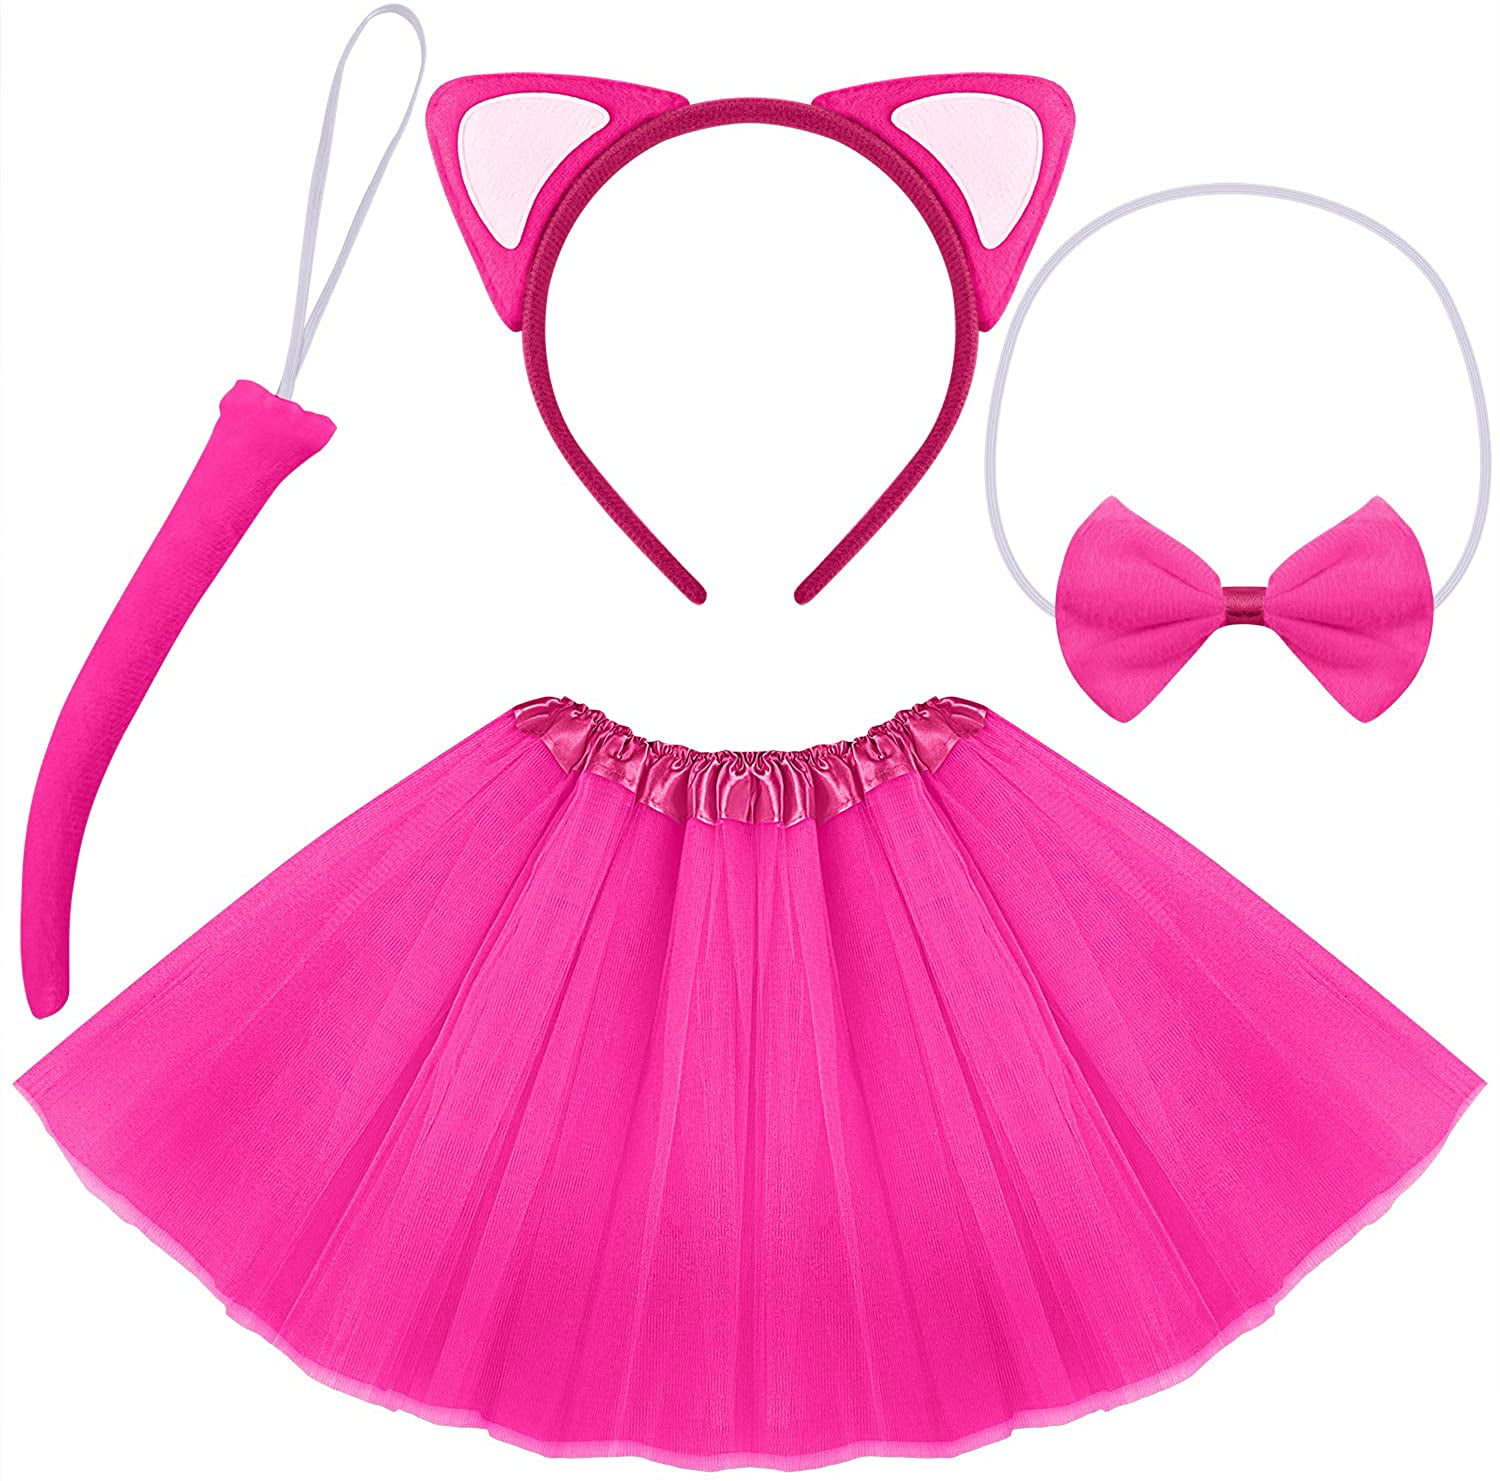 HOT PINK SPARKLE  BOW TULLE TUTU NET ALICE HAIR HEAD BAND 80s PARTY FANCY DRESS 